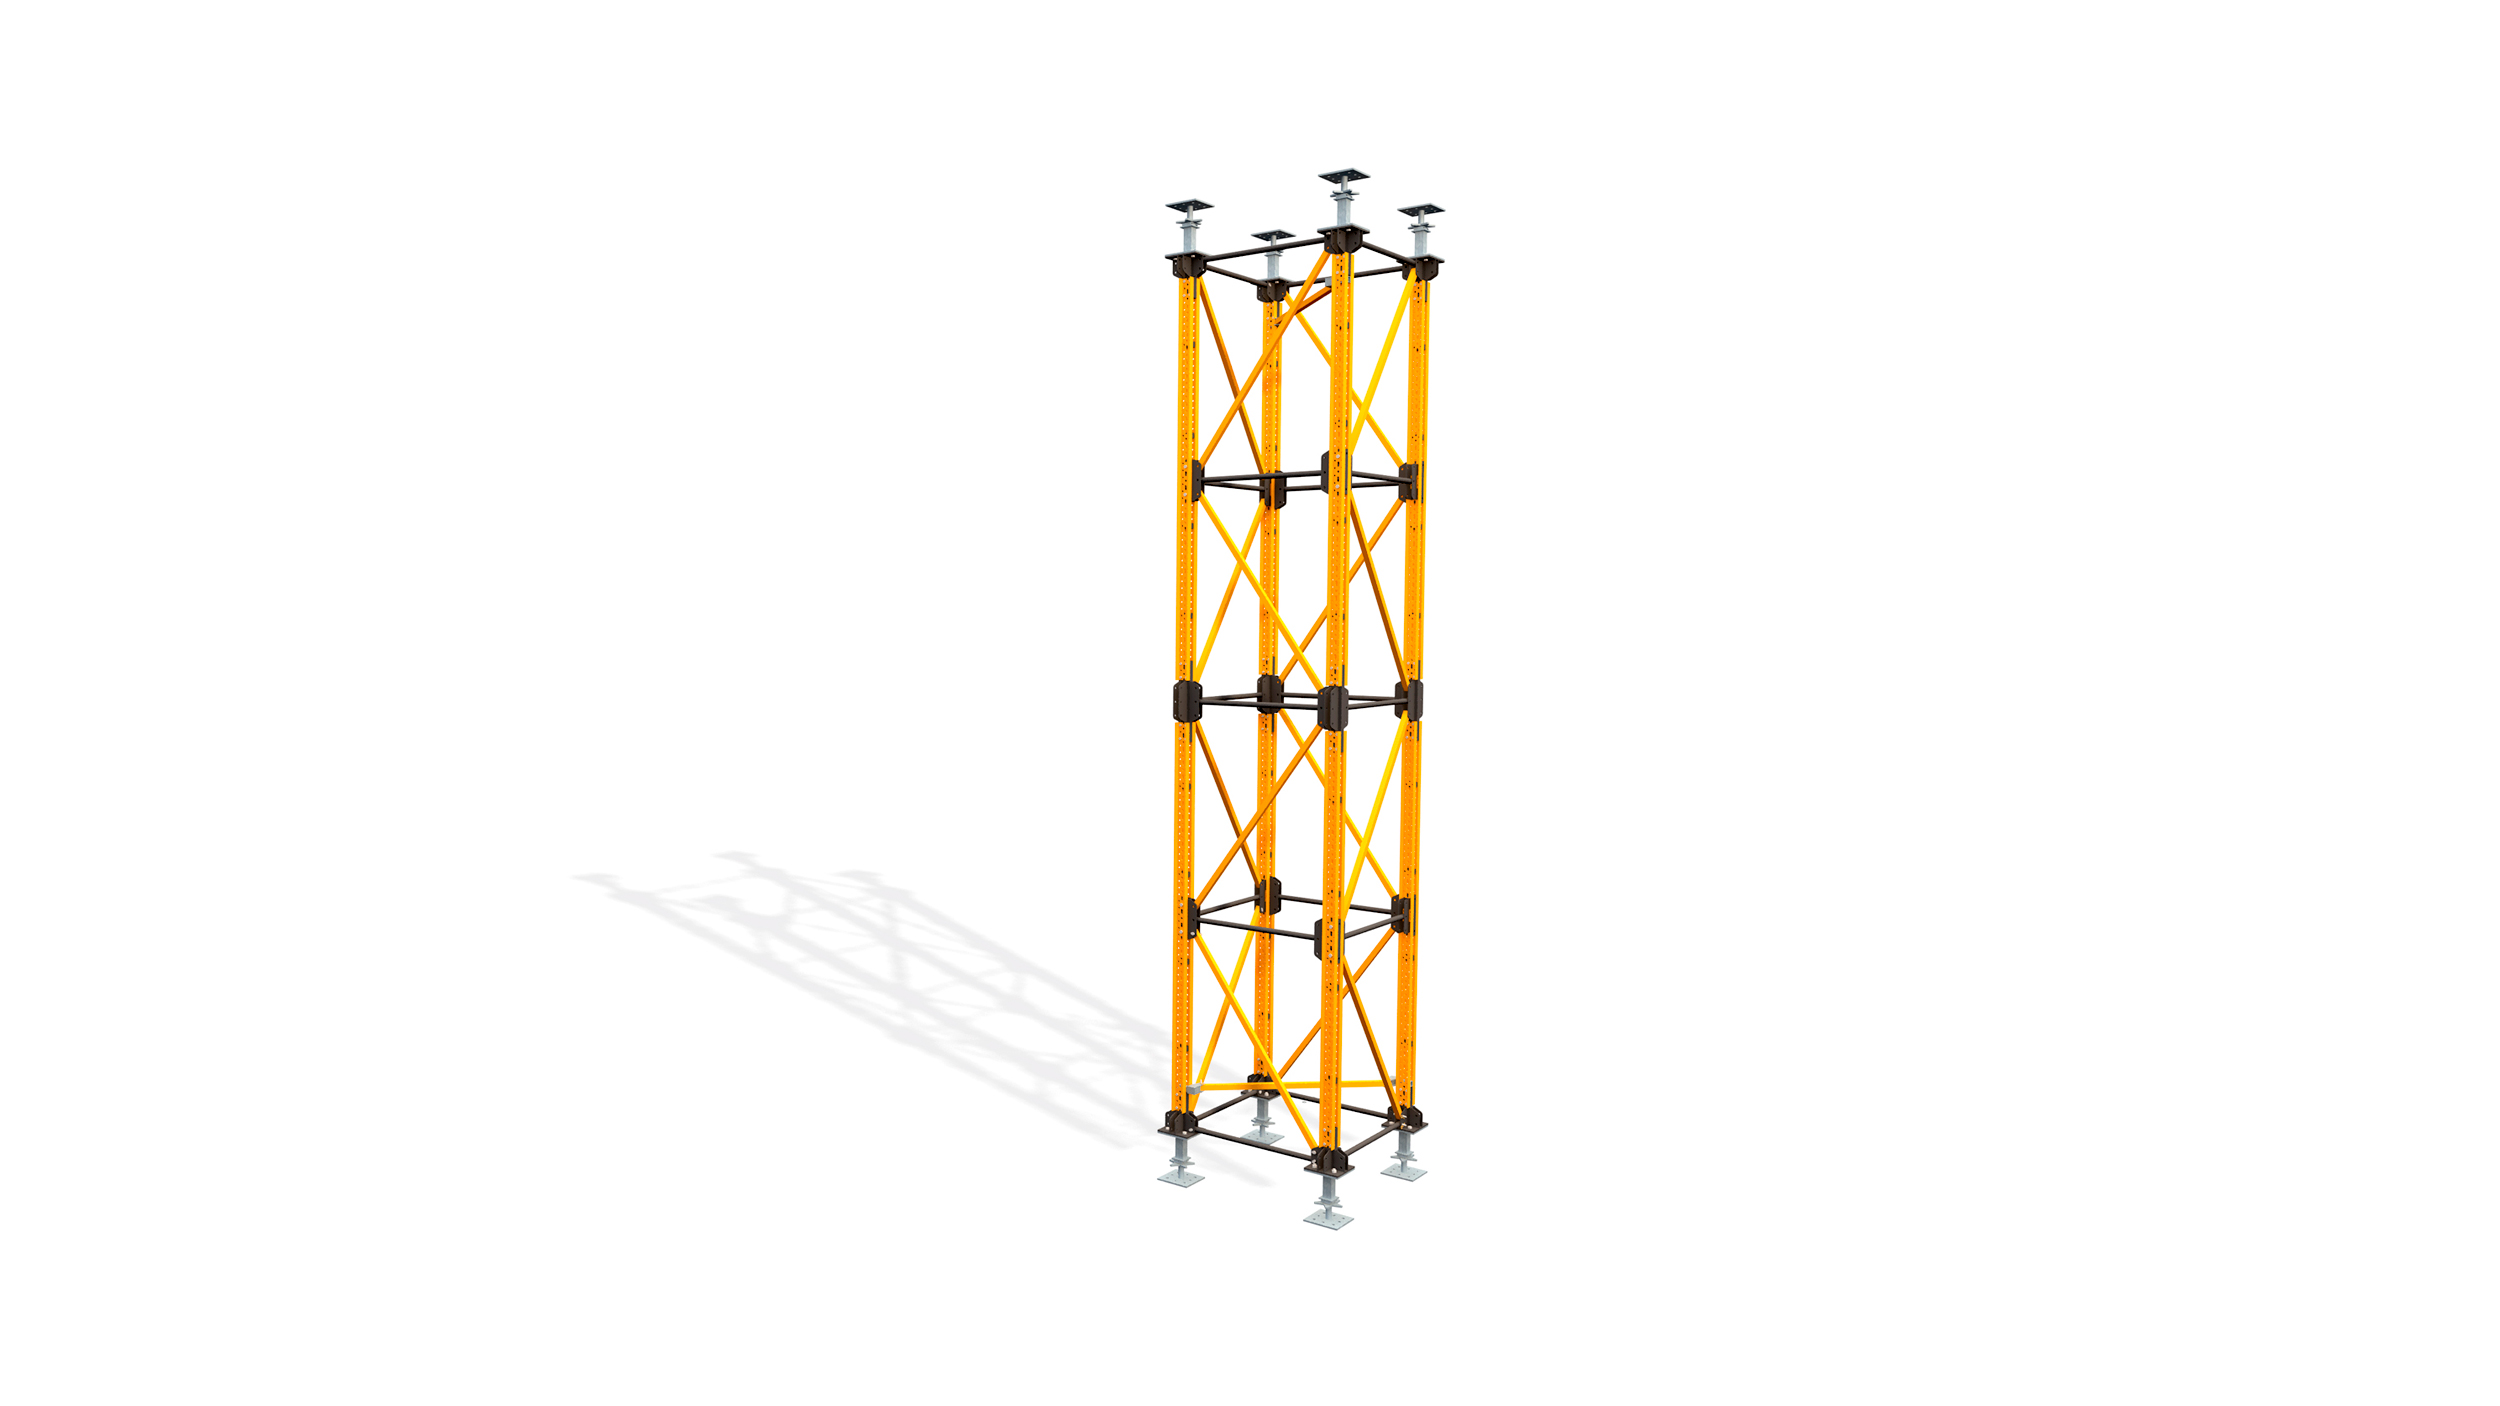 Heavy duty high load bearing shoring tower for civil engineering construction. Highlights: few components for multiple shoring configurations, quick and safe on-site erection.